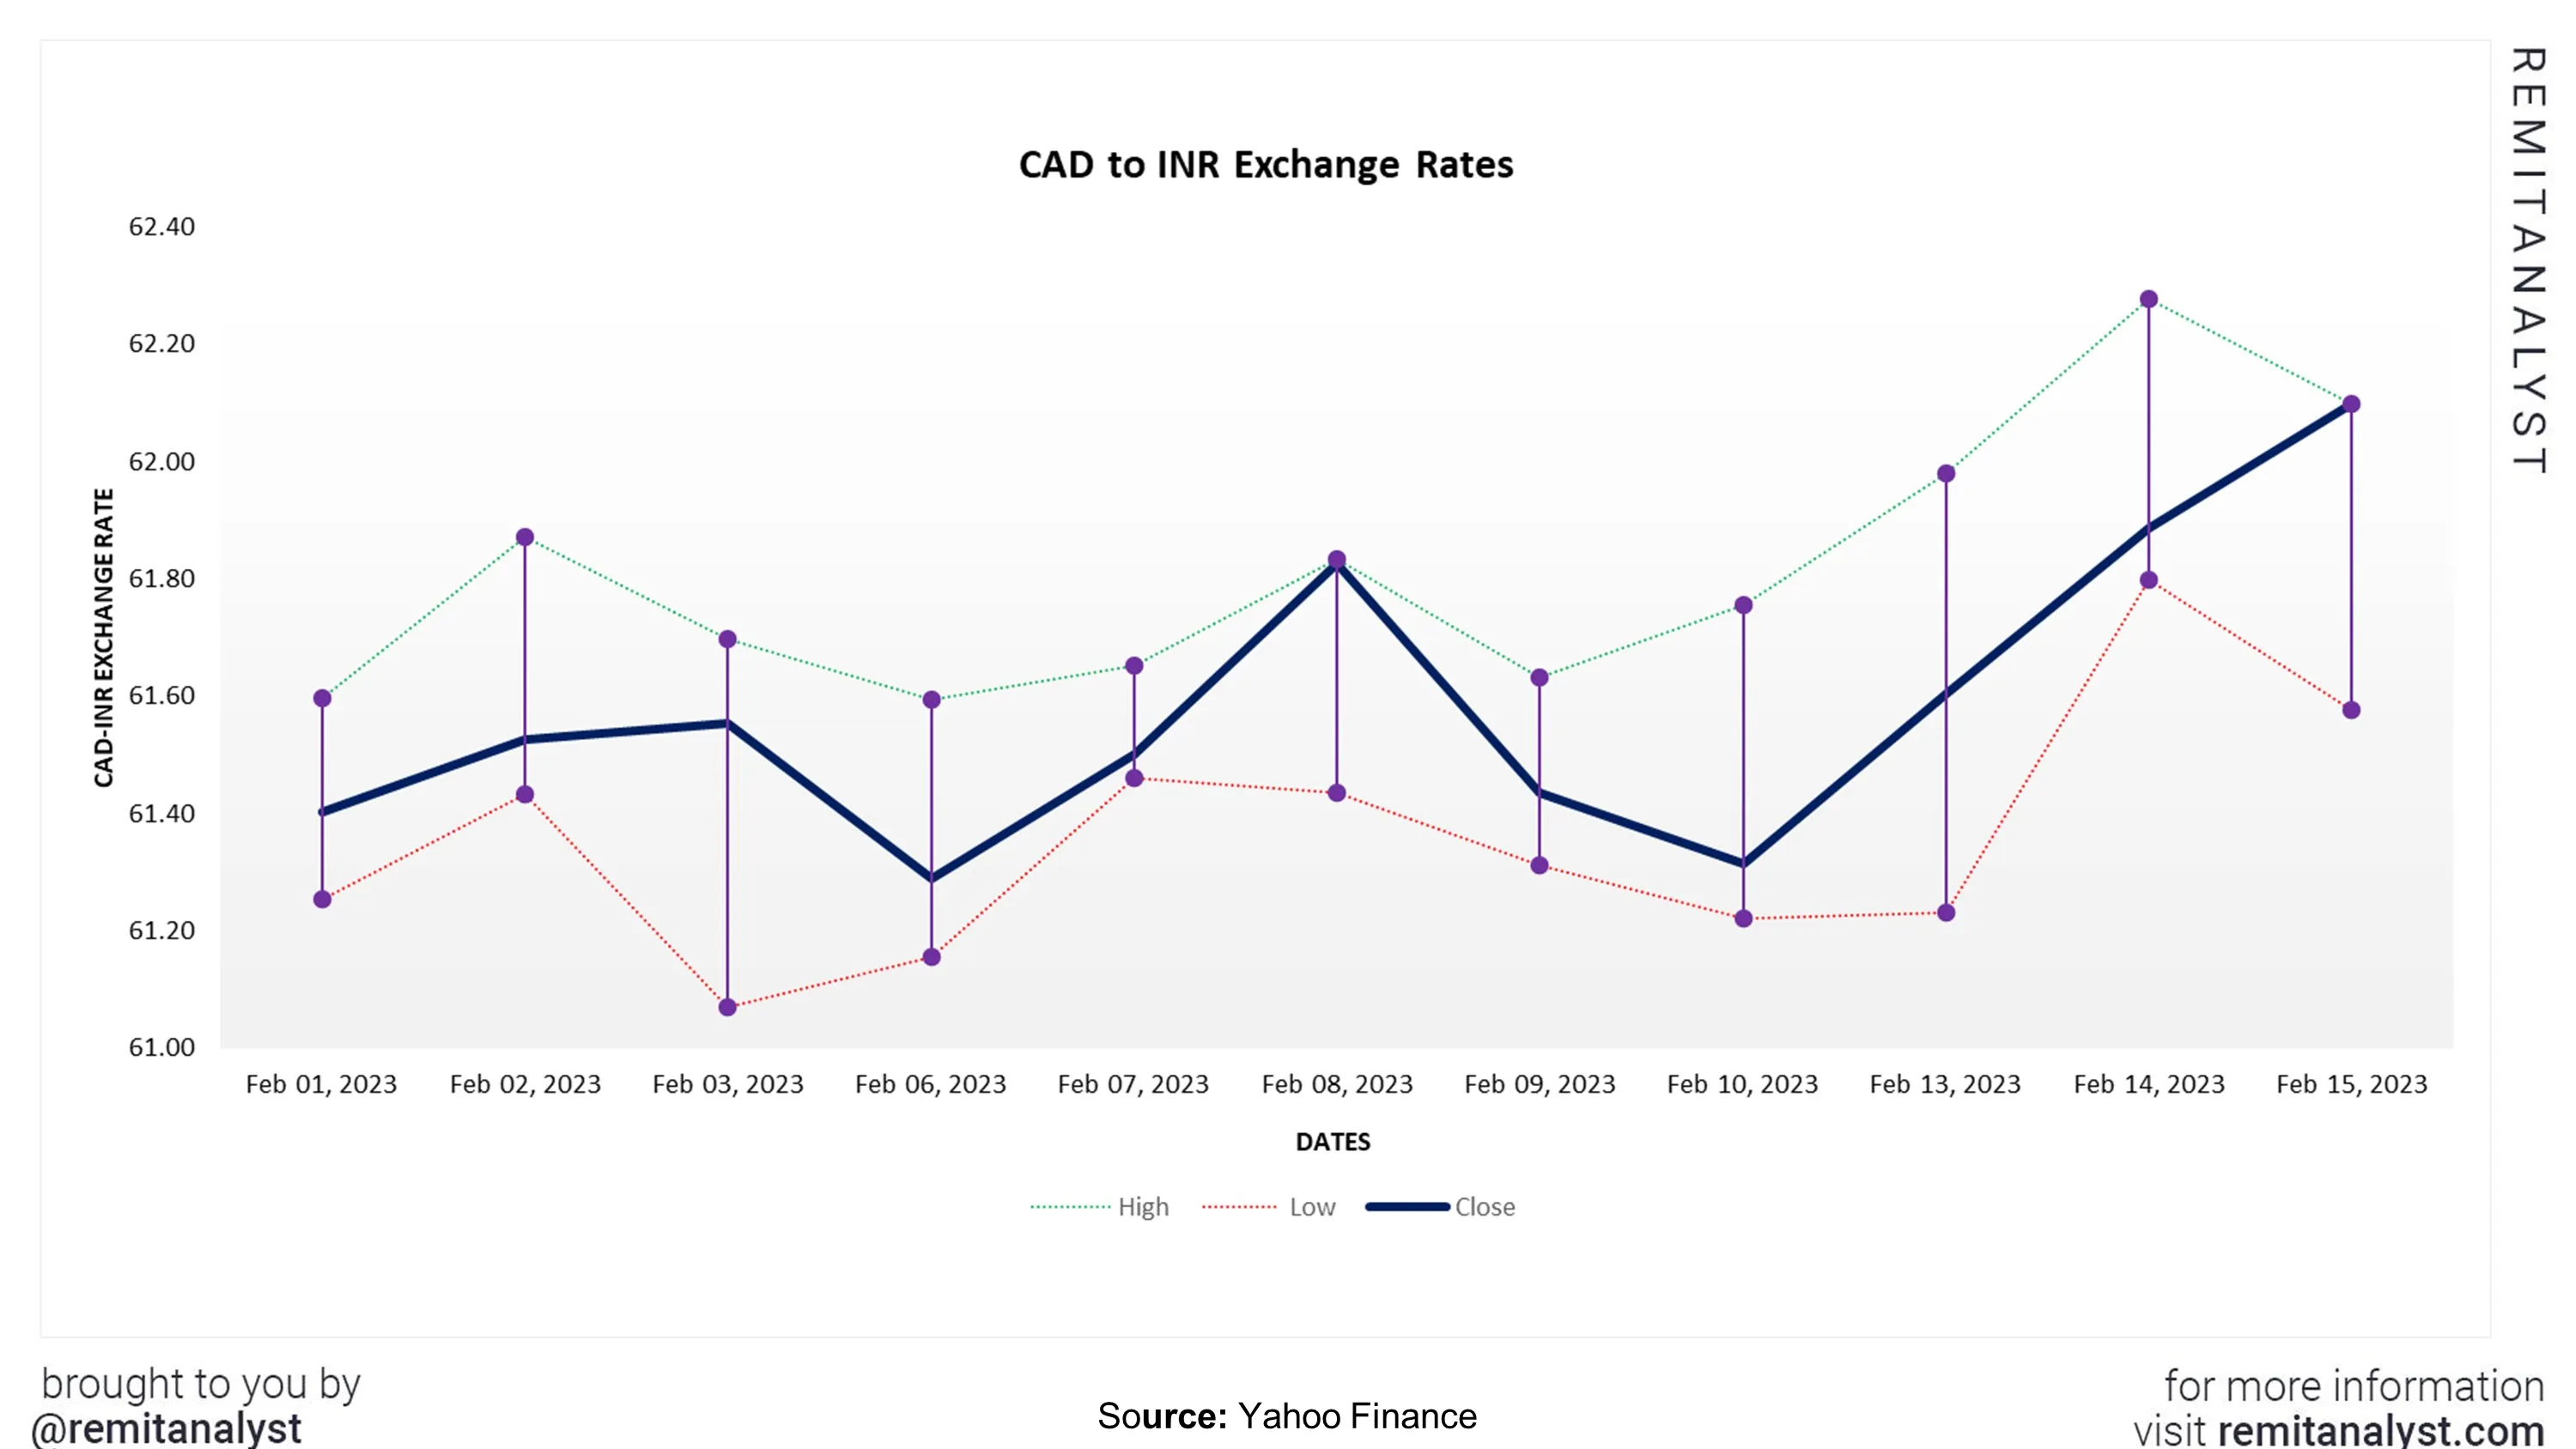 cad-to-inr-exchange-rate-from-1-feb-2023-to-15-feb-2023